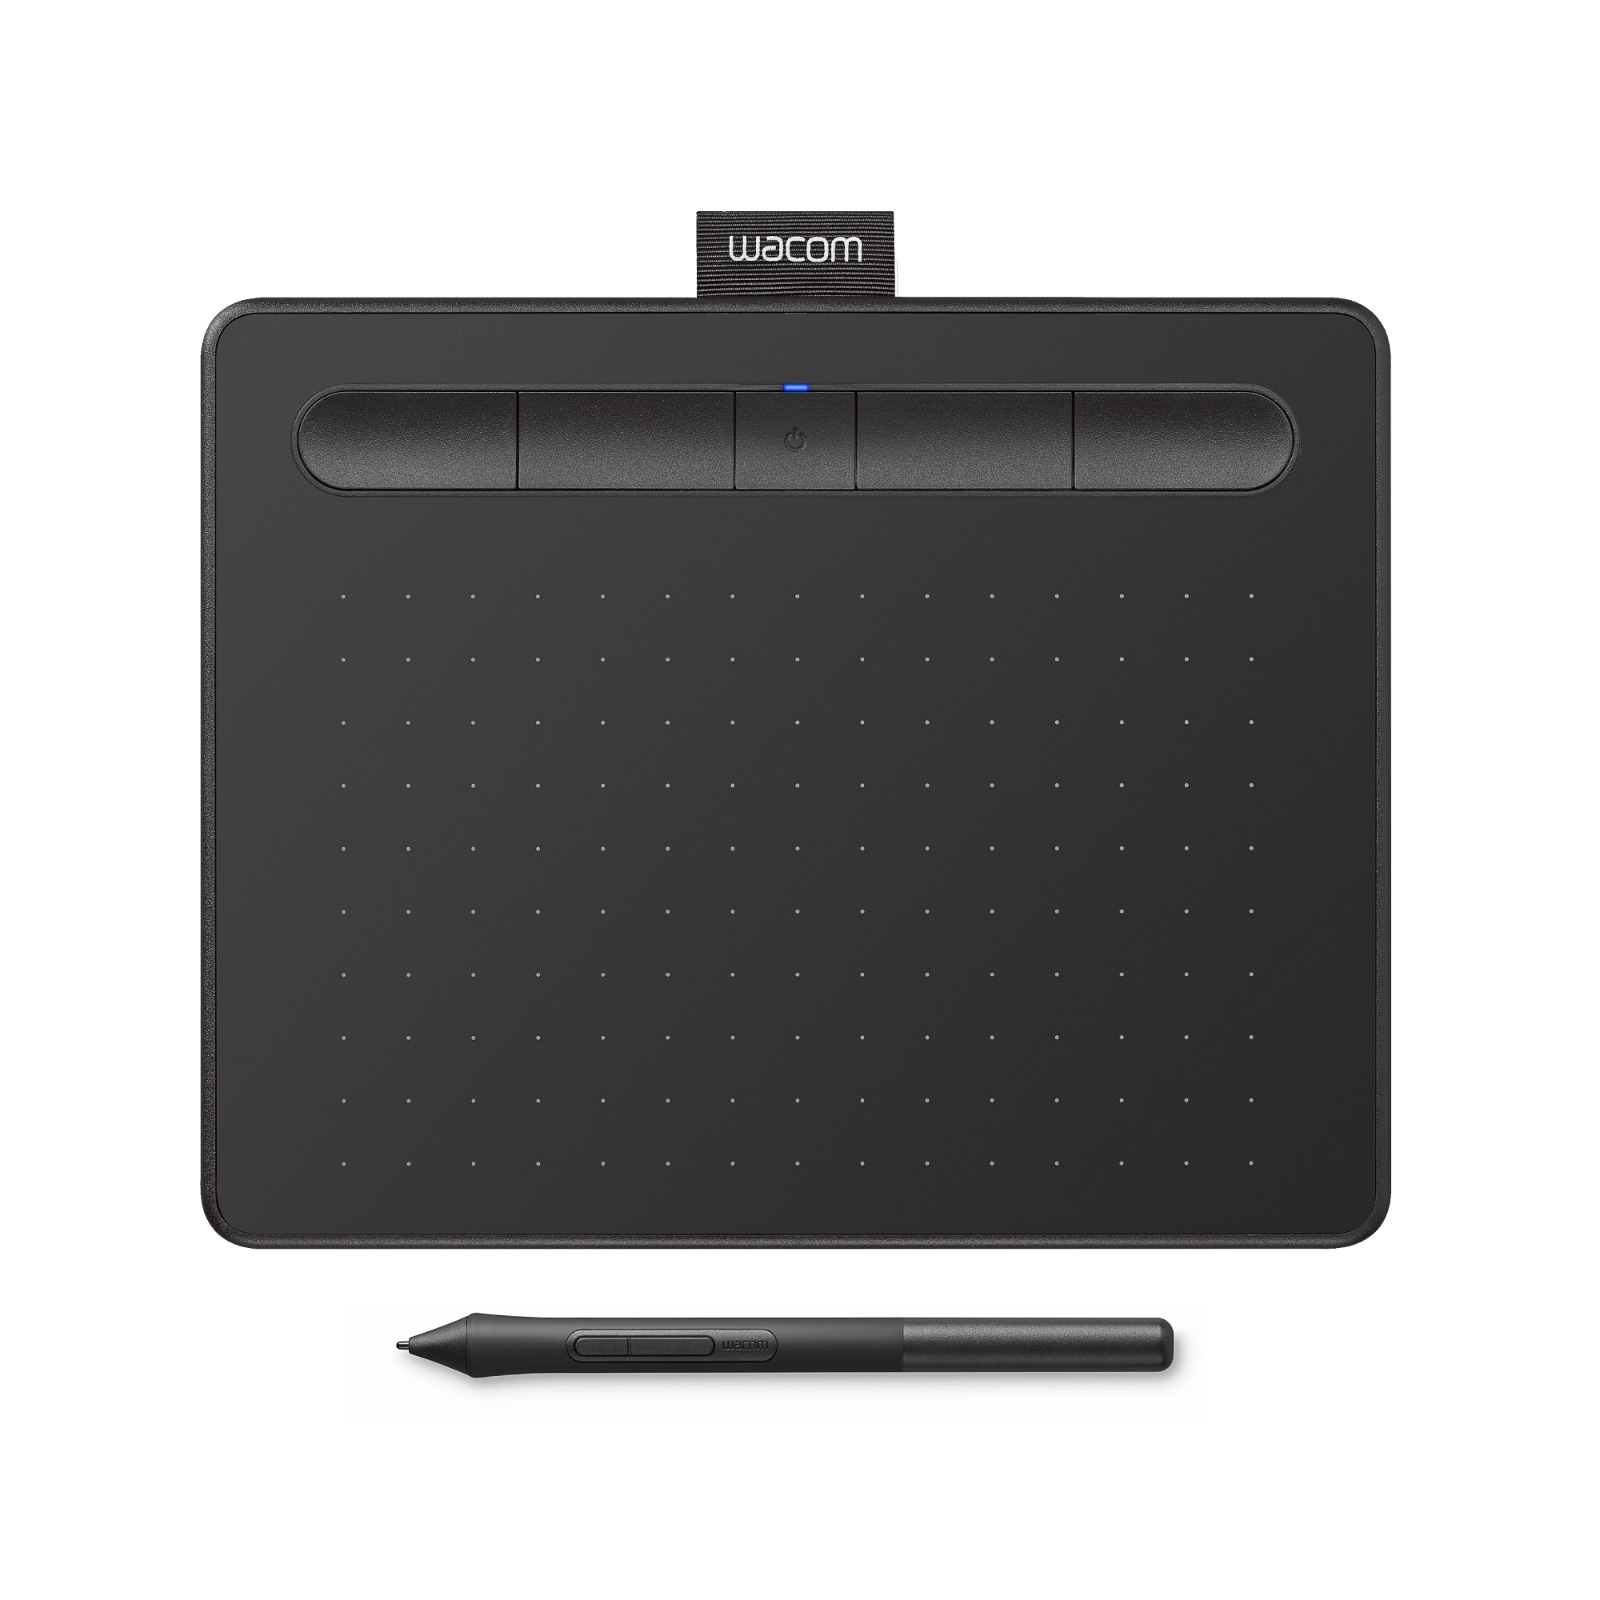 Wacom Intuos Wireless Graphics Drawing Tablet small - Black, New